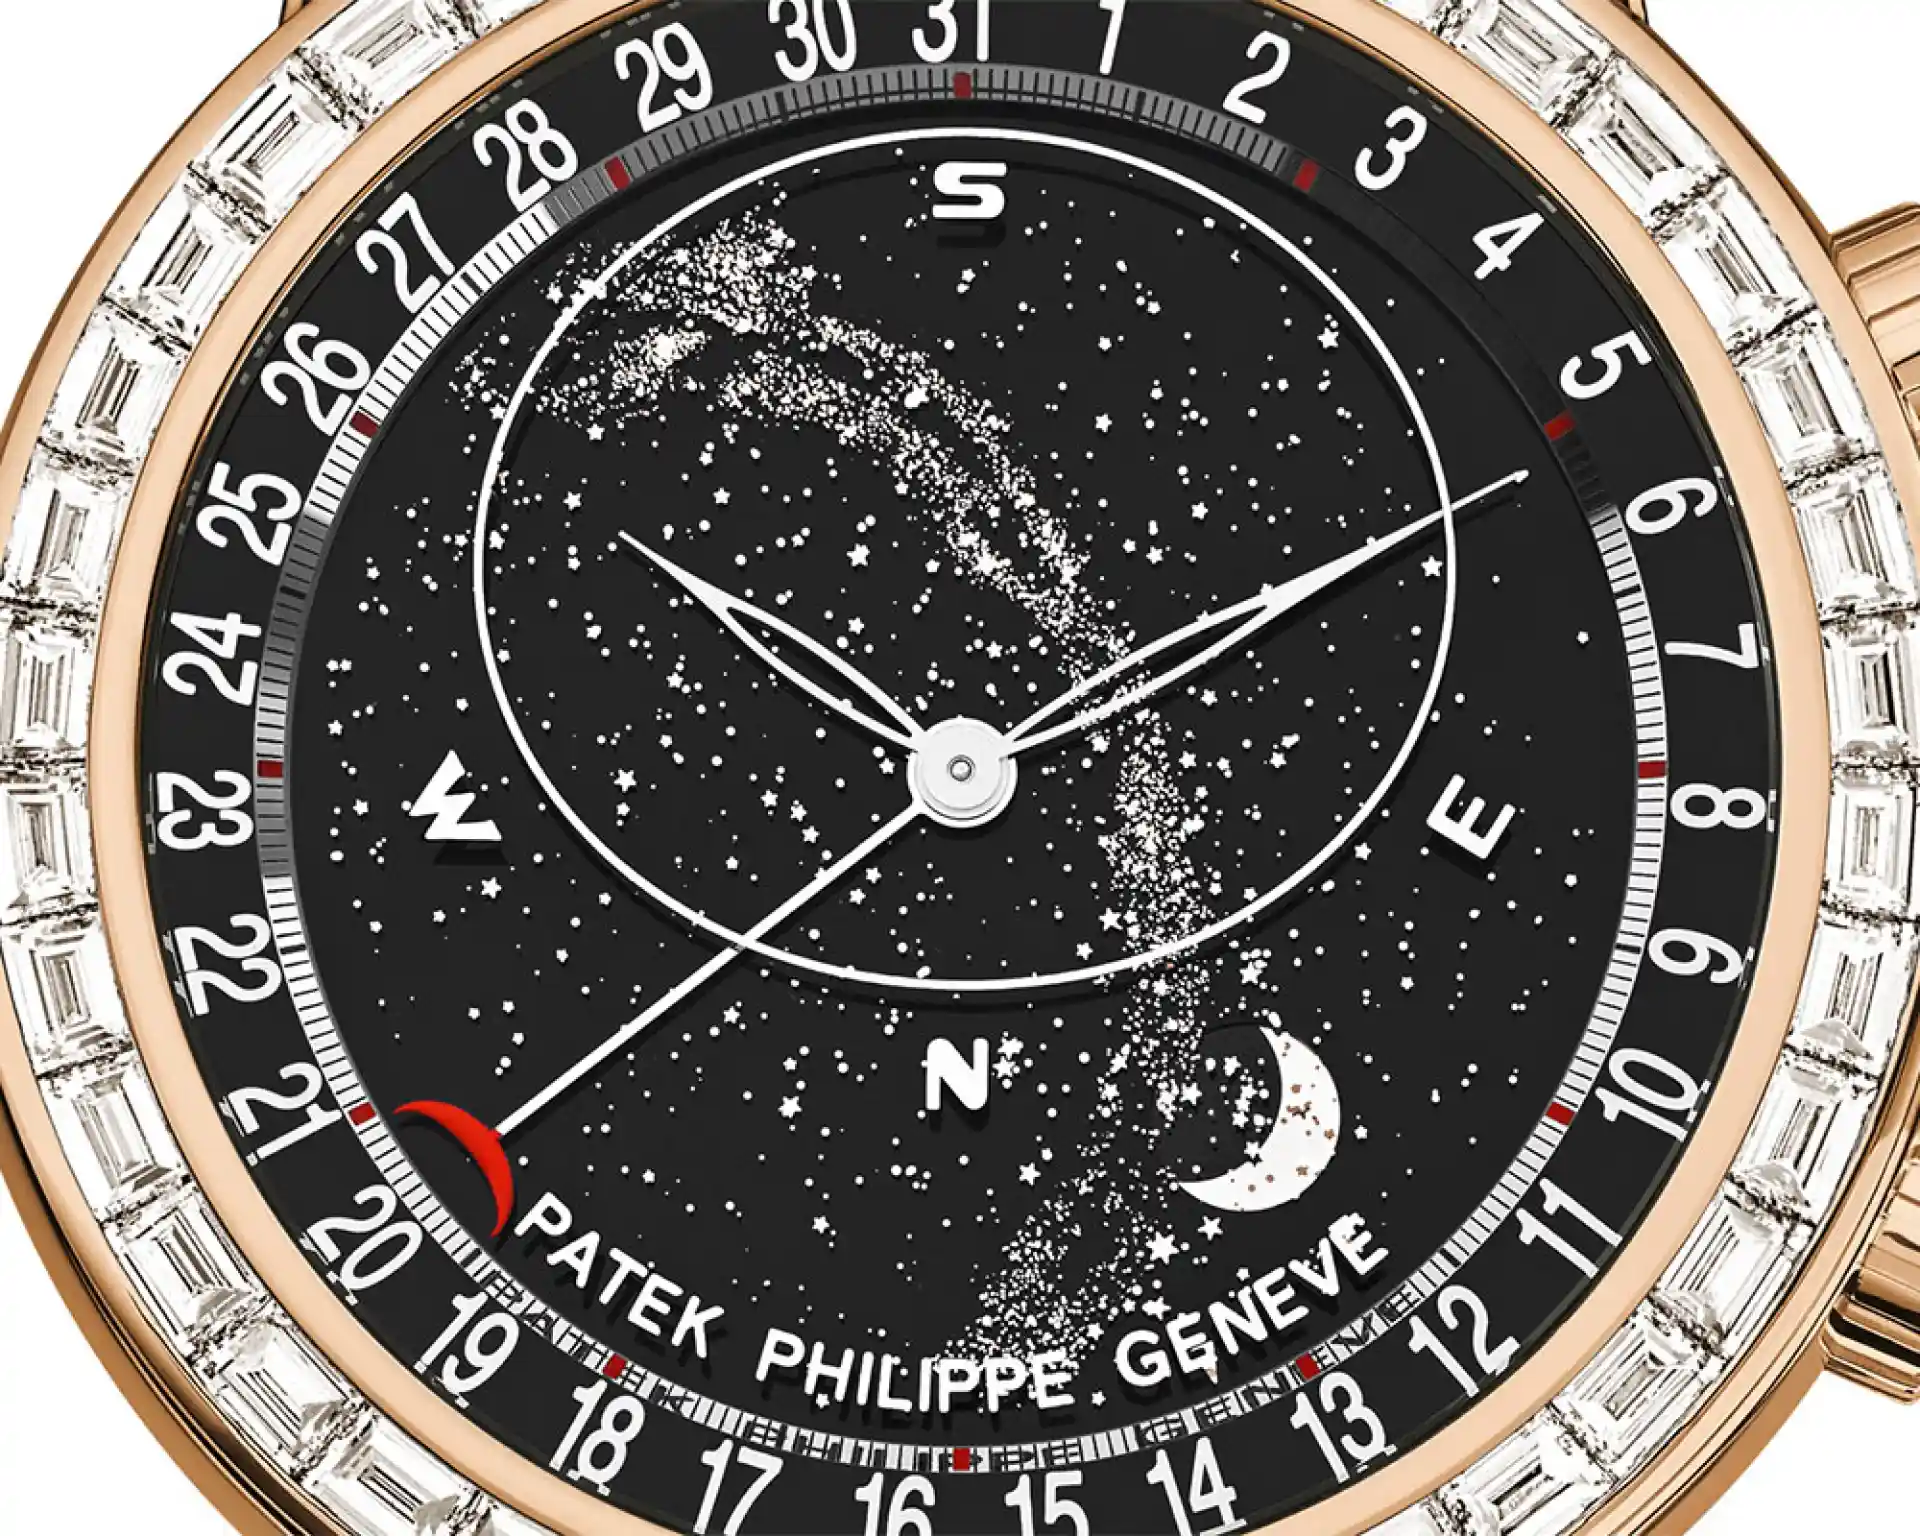 Patek Philippe Celestial Moon Age 6104r 001 At Cortina Watch Close Up 1